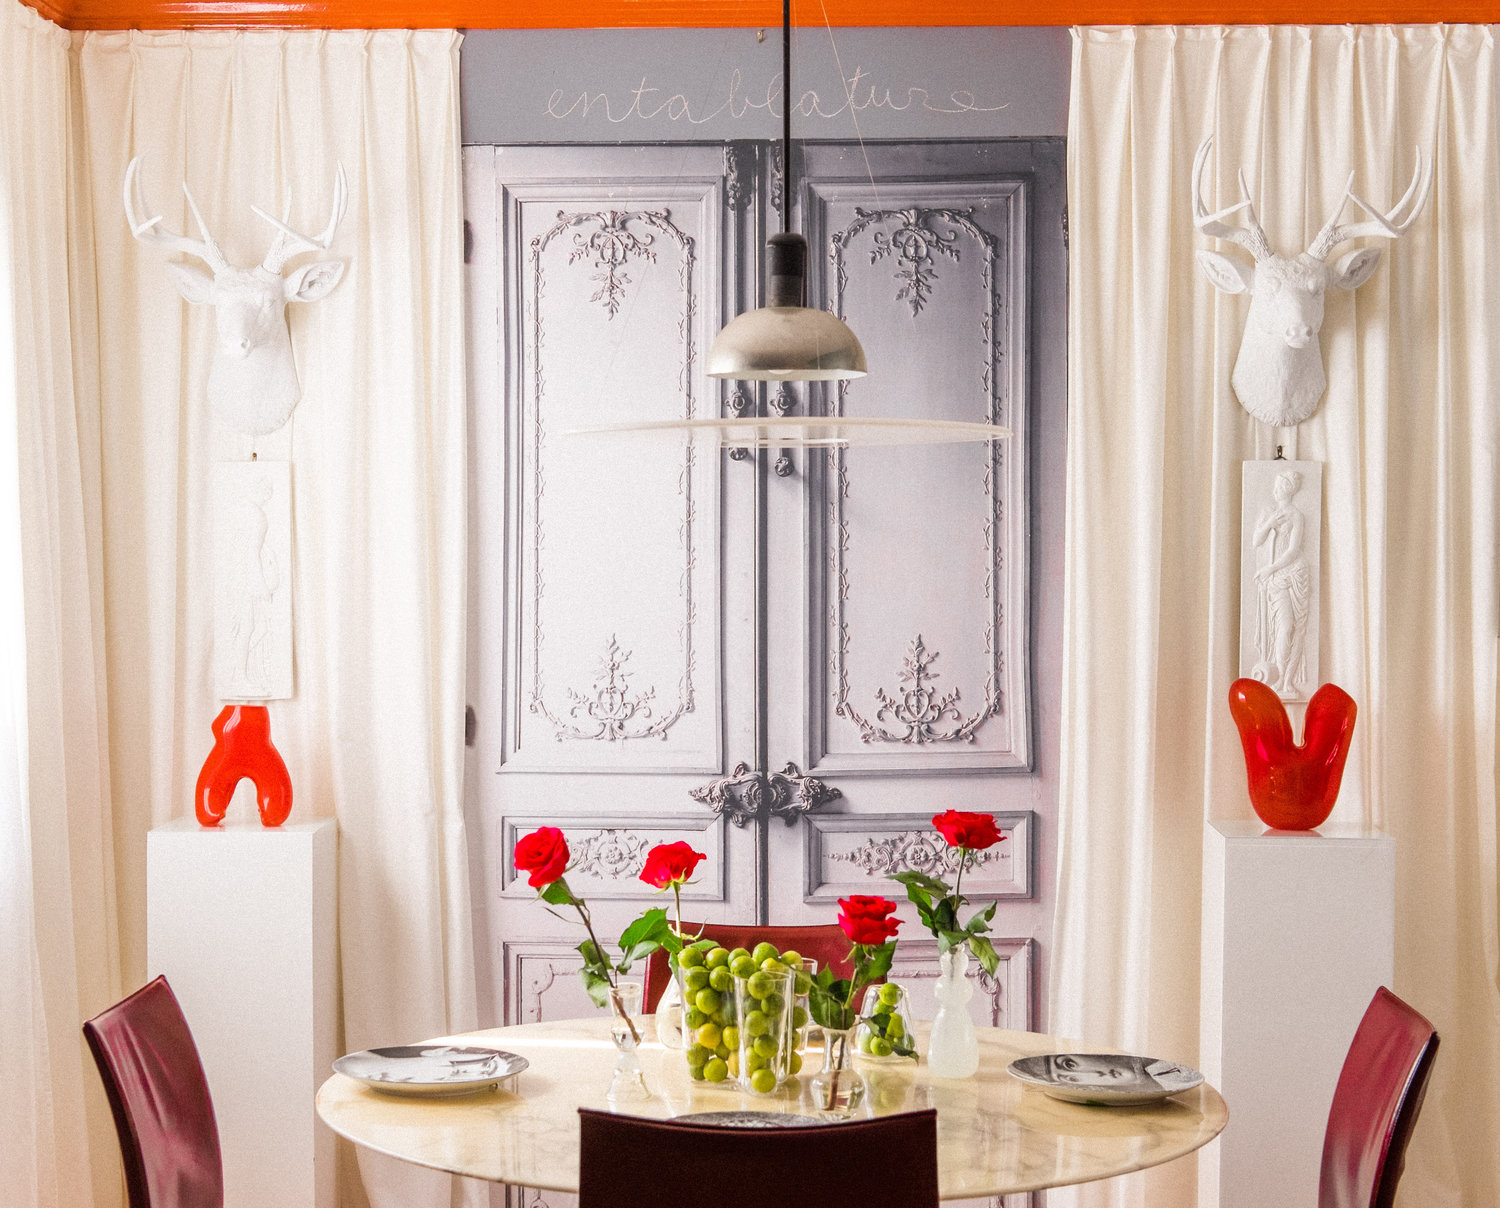 A chic dining area features a round table with roses, green grapes, ornate gray doors, white curtains, deer busts, modern red sculptures, and a hanging lamp.